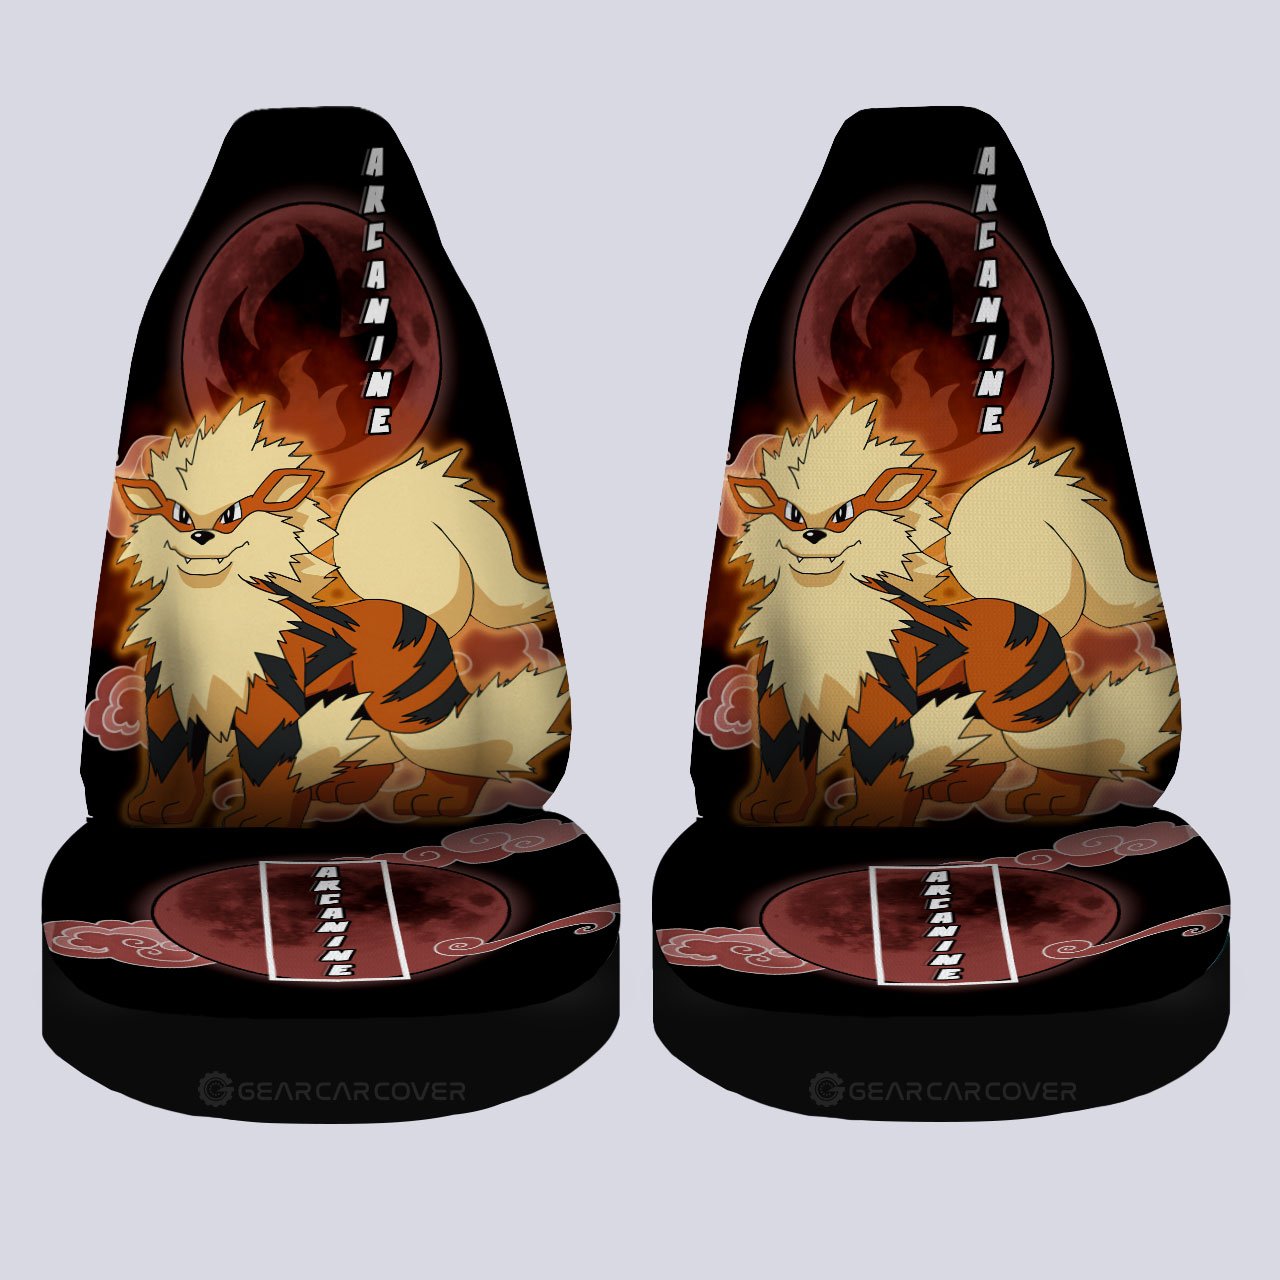 Arcanine Car Seat Covers Custom Car Accessories For Fans - Gearcarcover - 4